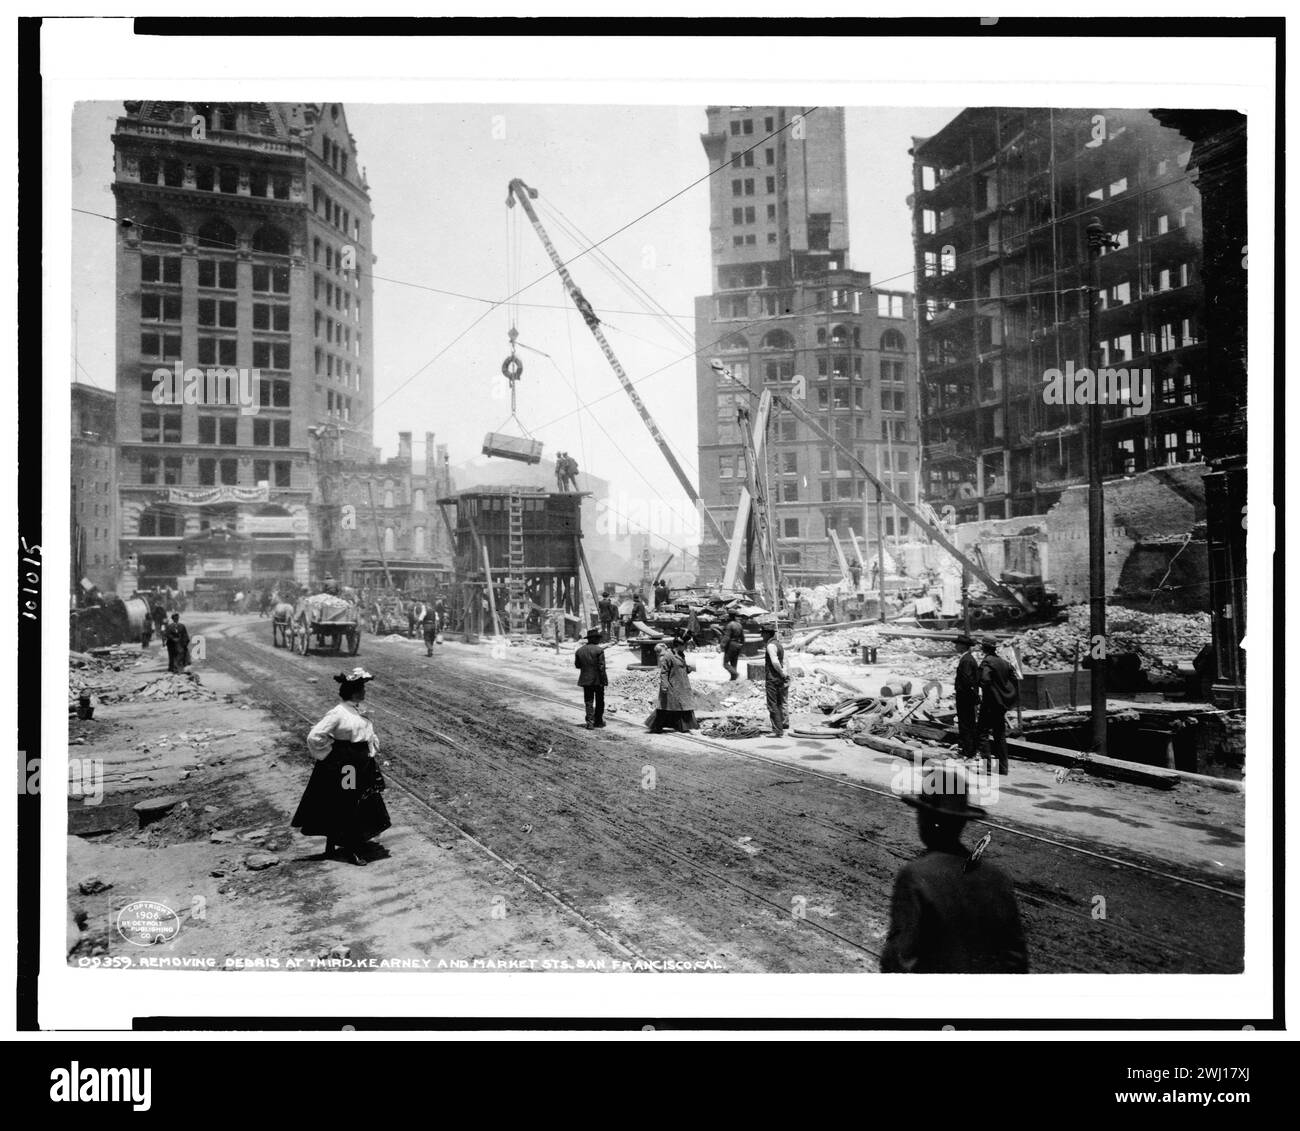 San Francisco 1906 Earthquake.  View after earthquake and fire, showing crane moving rubble, as several men and a woman pass by. Stock Photo